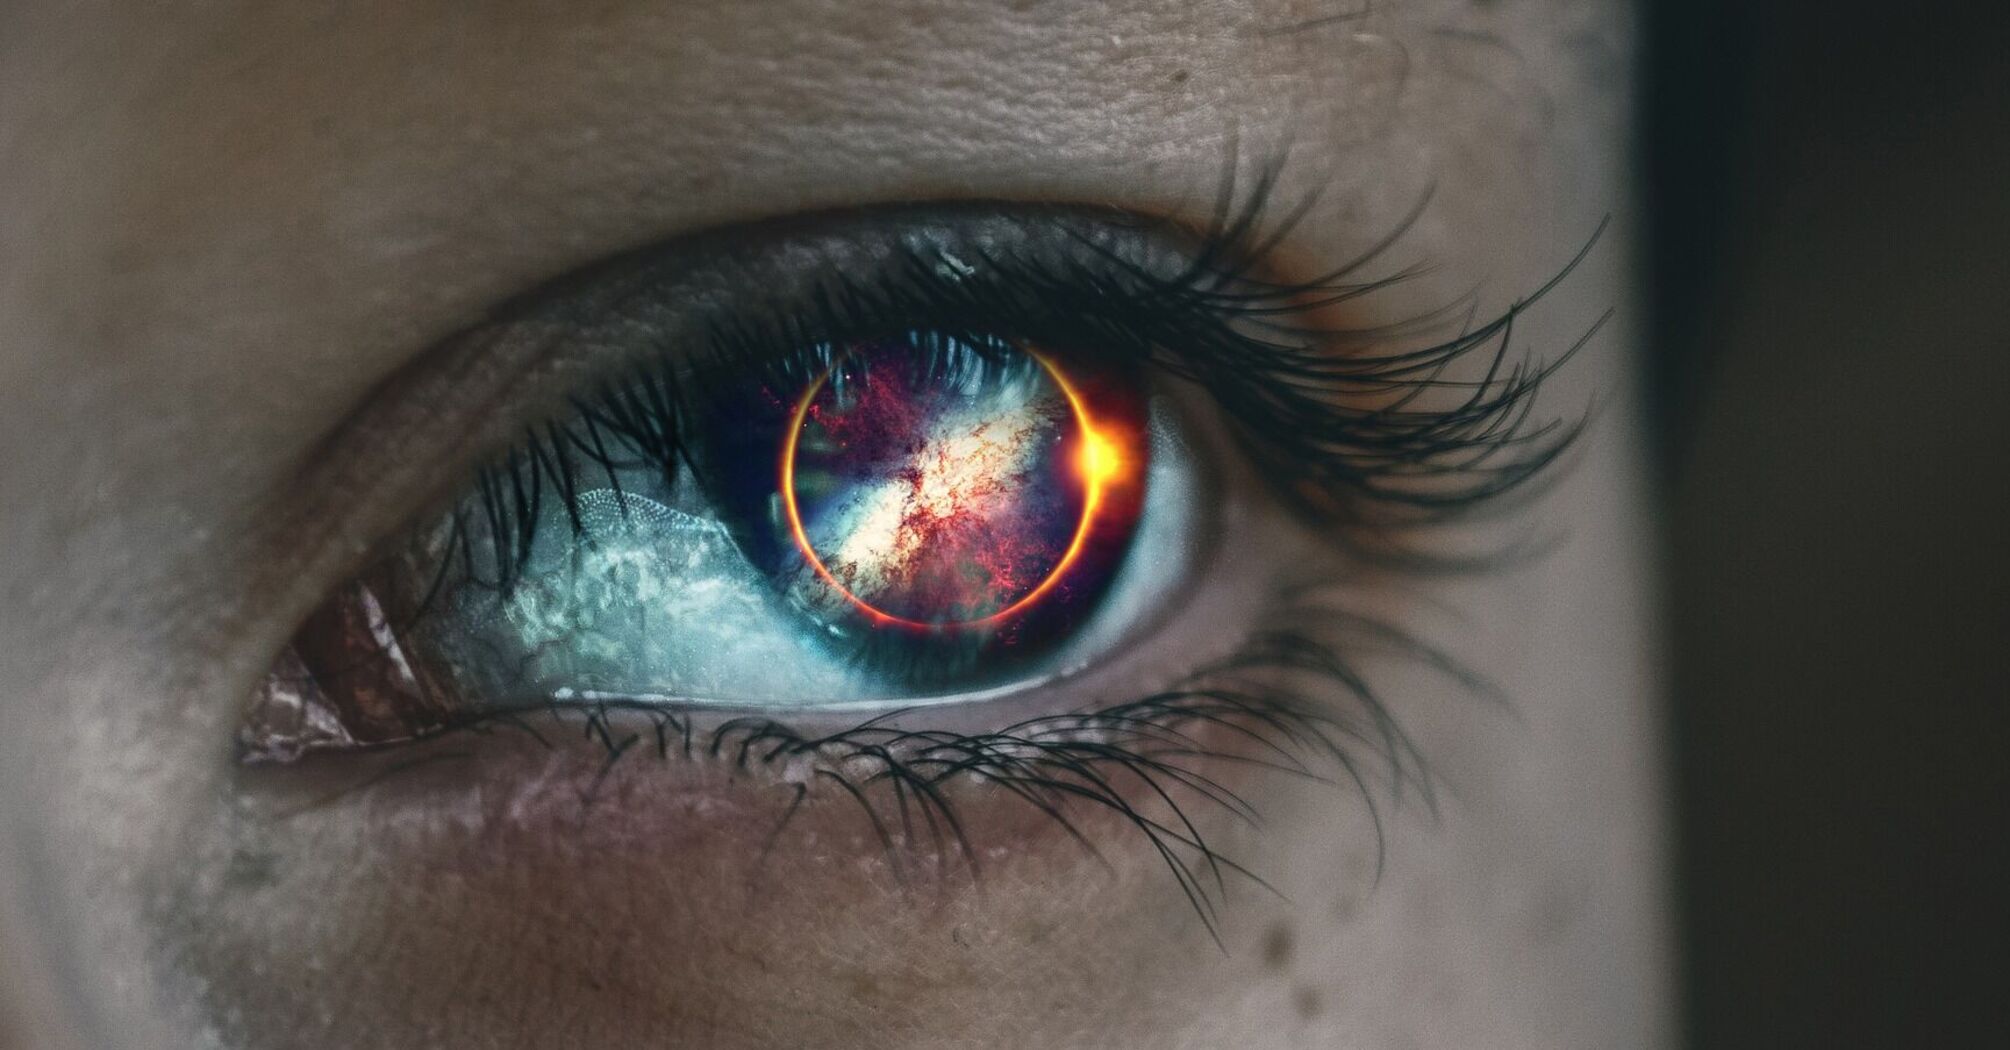 Close-up of an eye with a solar eclipse reflected in the pupil